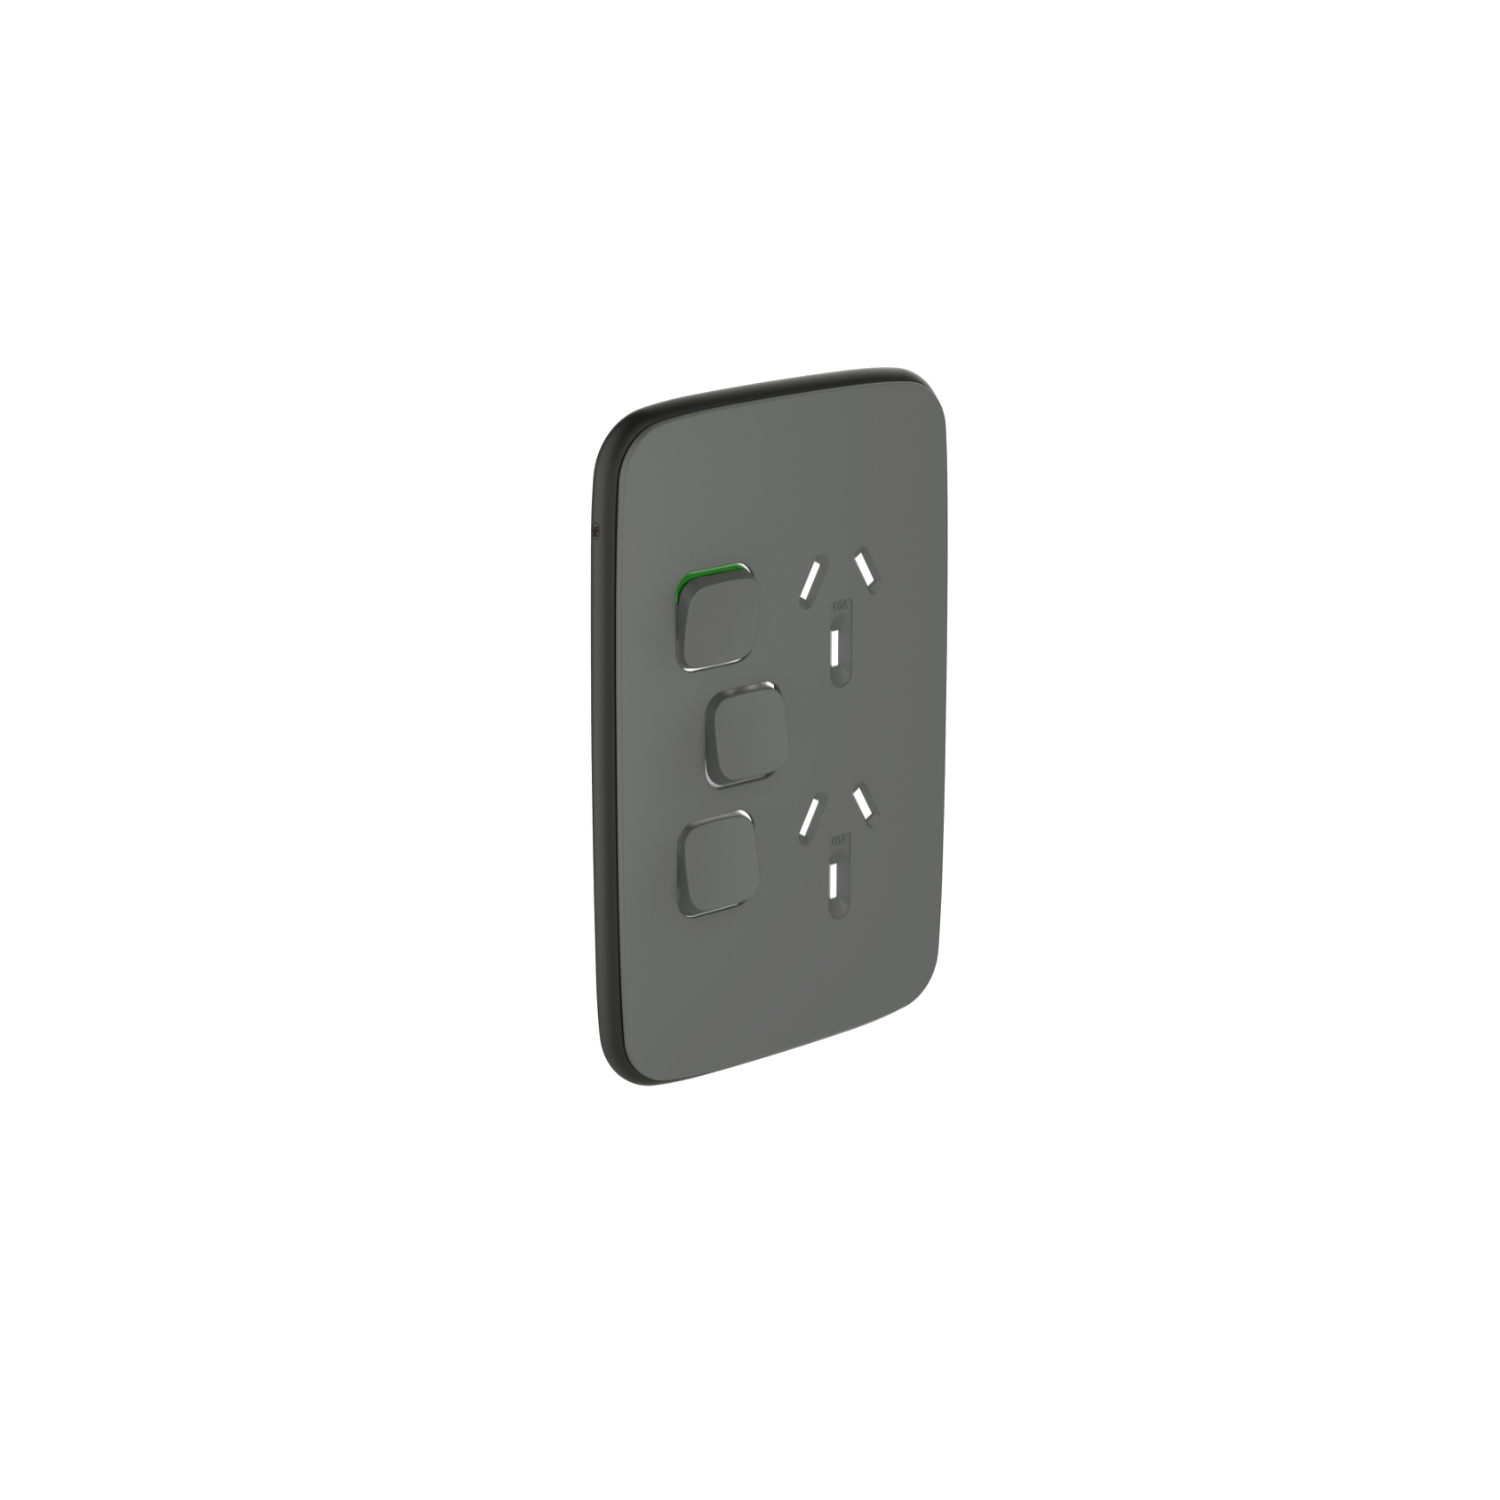 PDL Iconic Essence, cover frame, 3 switches & 2 sockets, 10 A, vertical - Ash Grey